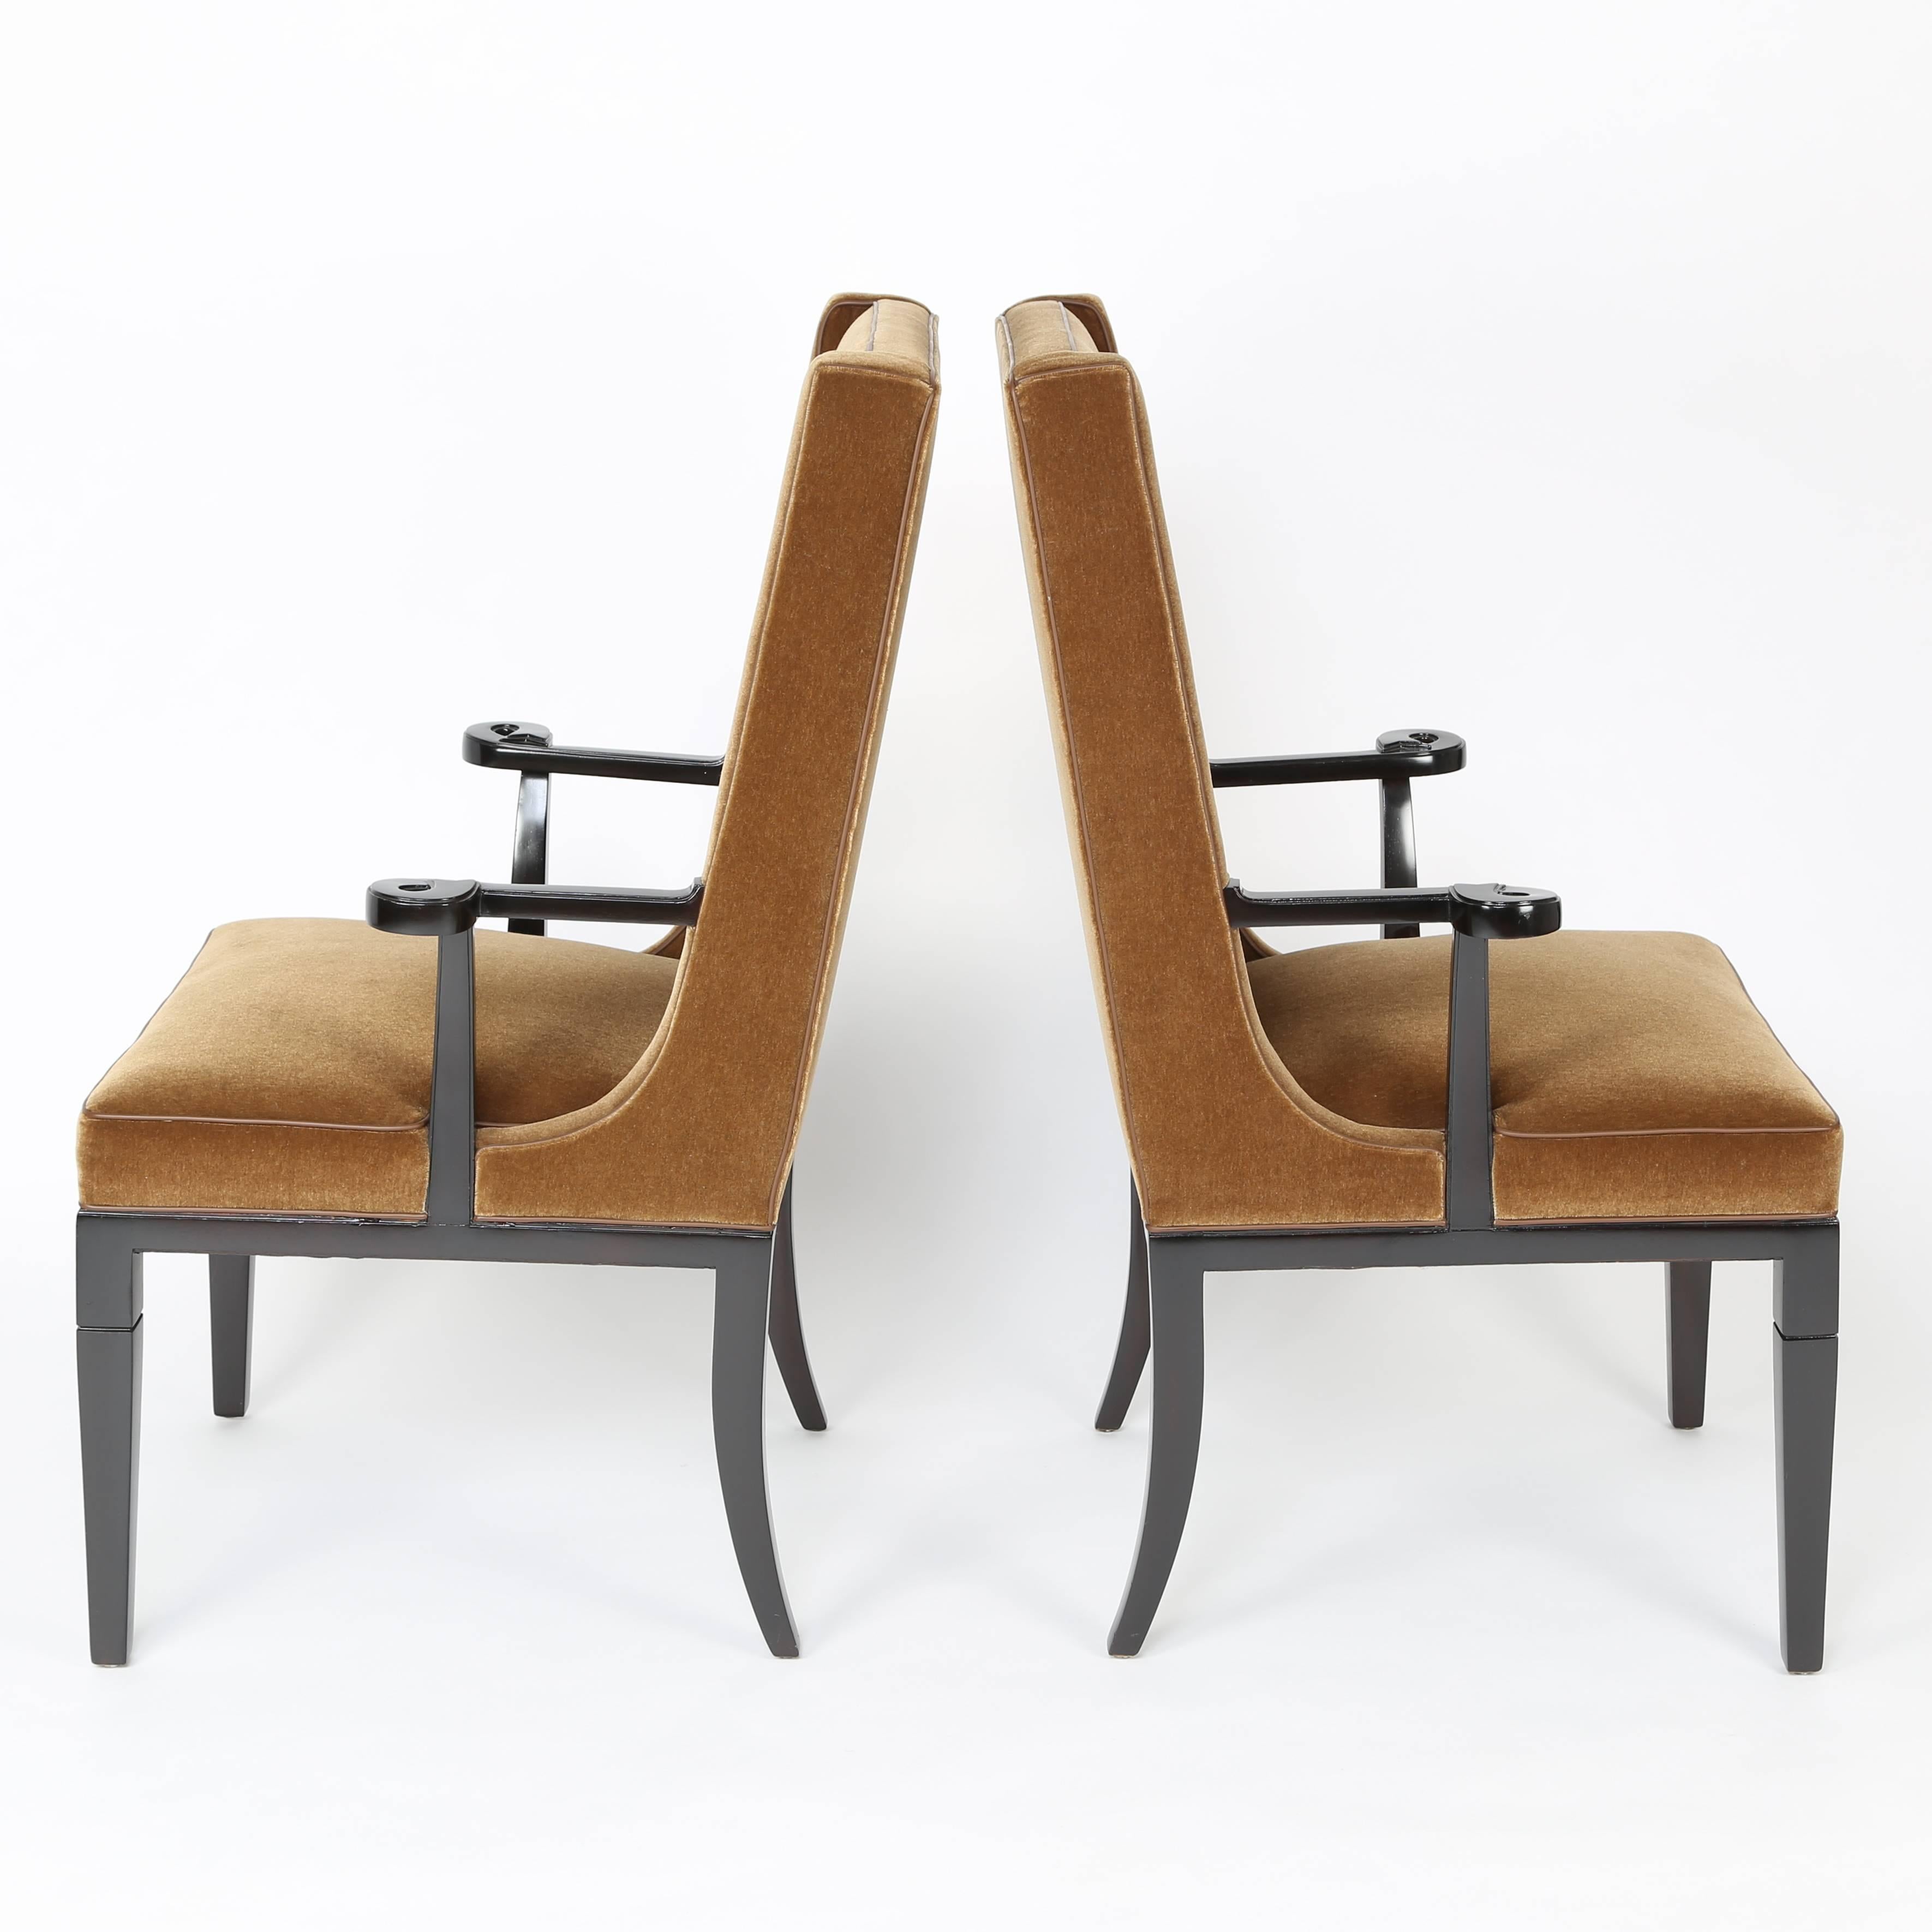 Lacquered Pair of Armchairs by Tommi Parzinger for Charak Modern, circa 1940s For Sale